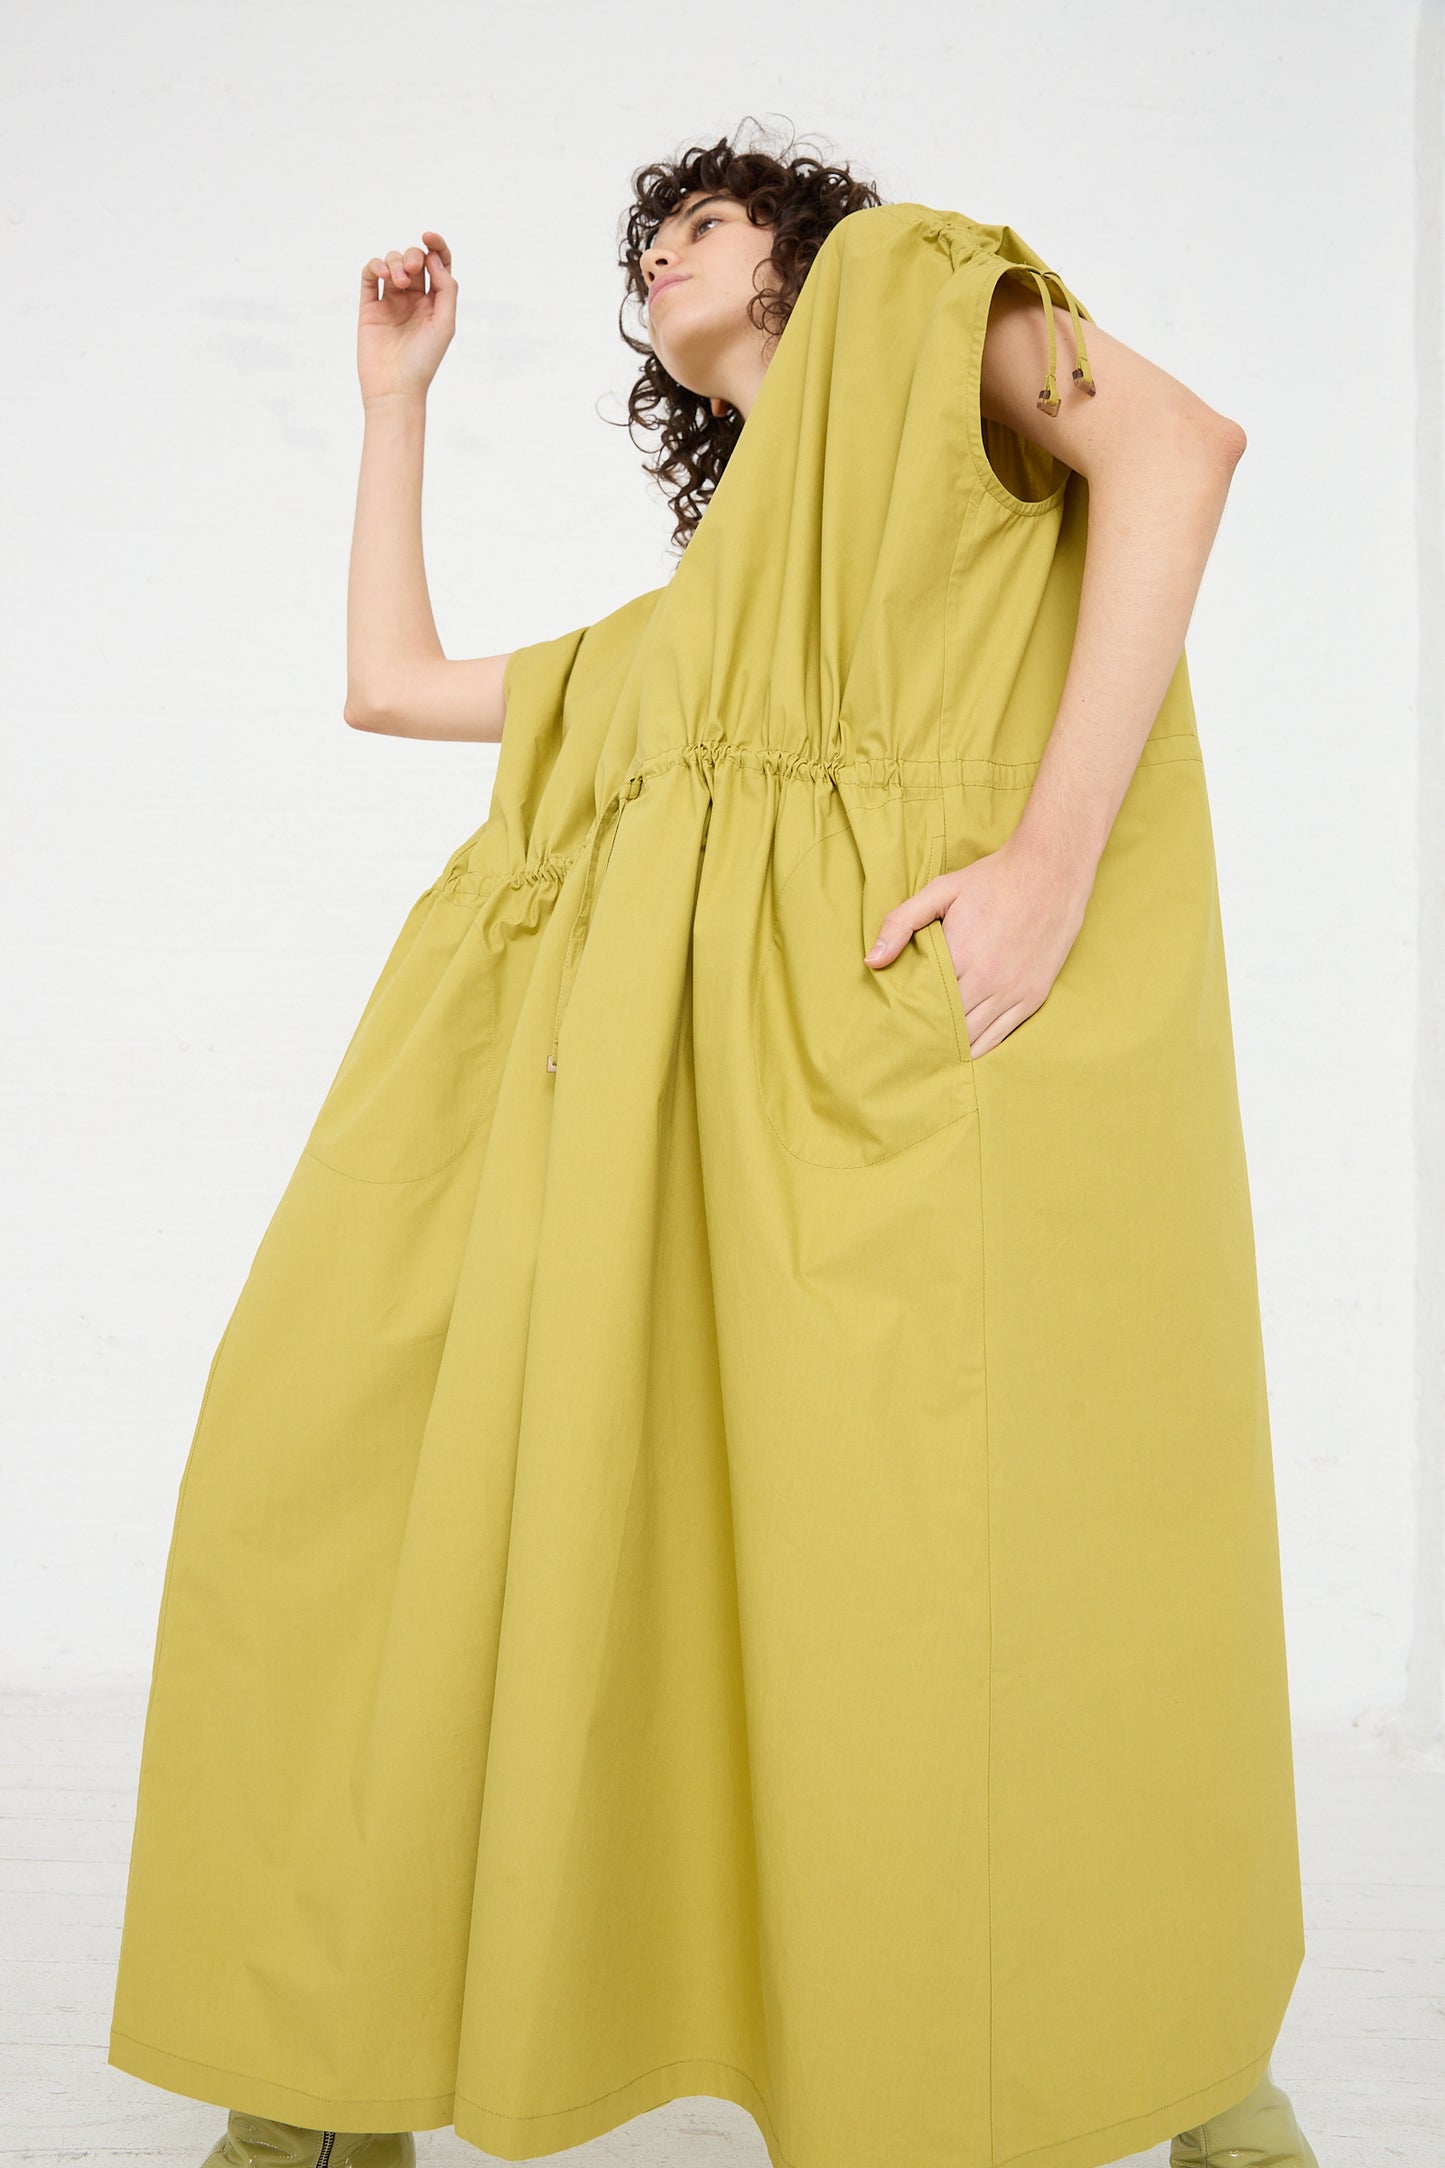 A woman in an oversized yellow Veronique Leroy Cotton Poplin Gathered Dress in Matcha is posing in a white room.